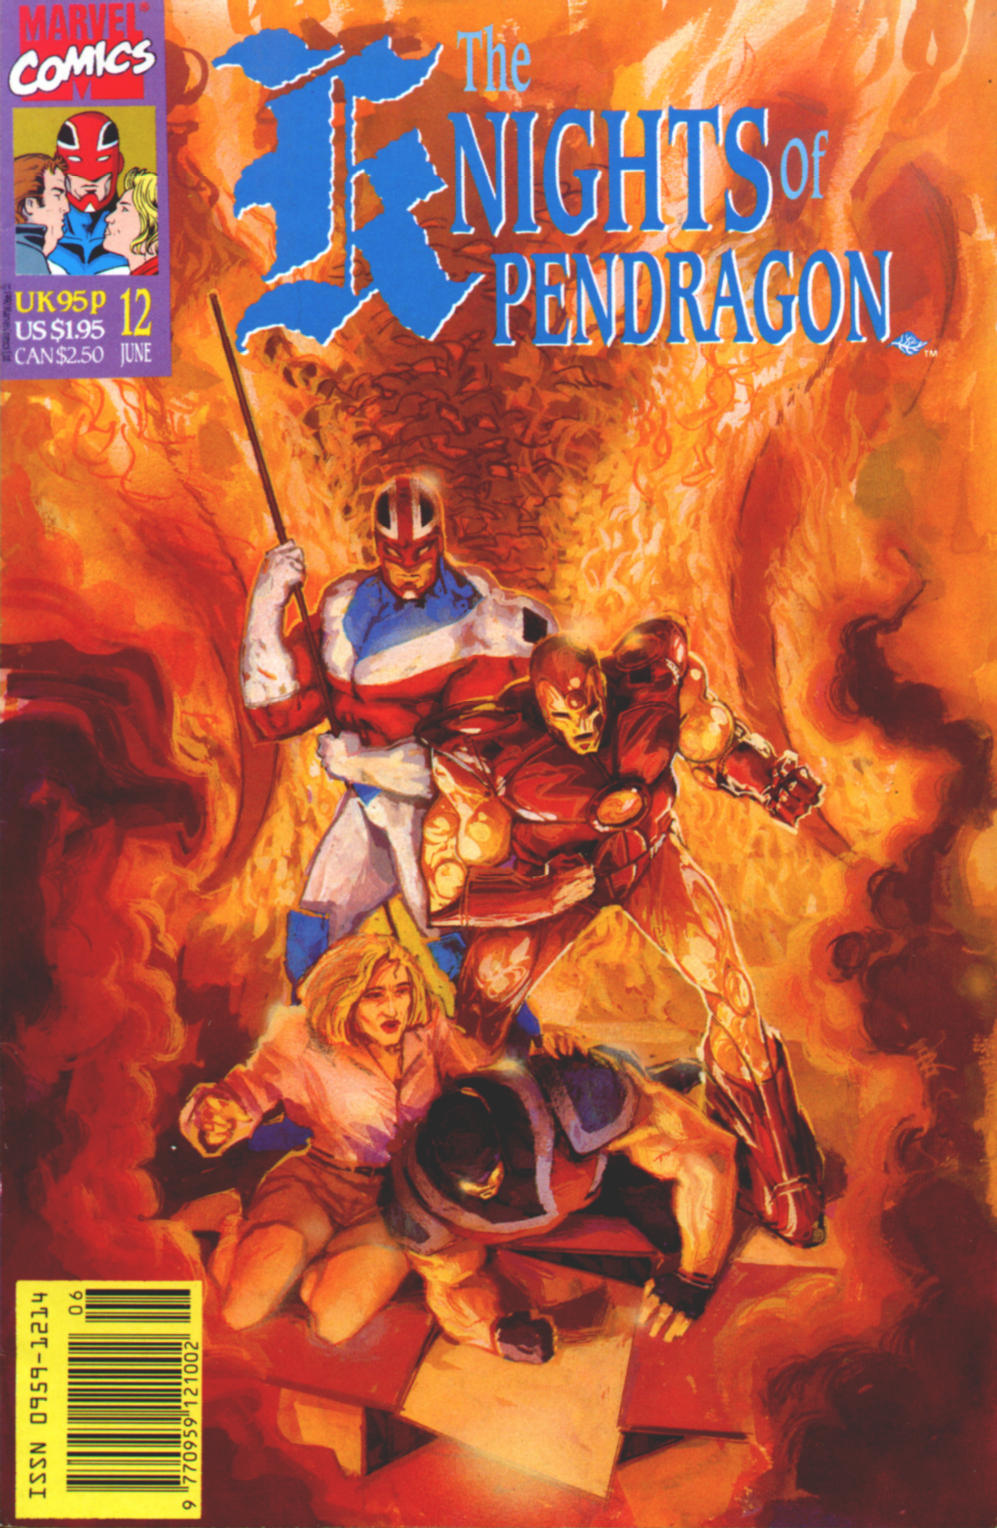 Read online The Knights of Pendragon comic -  Issue #12 - 1